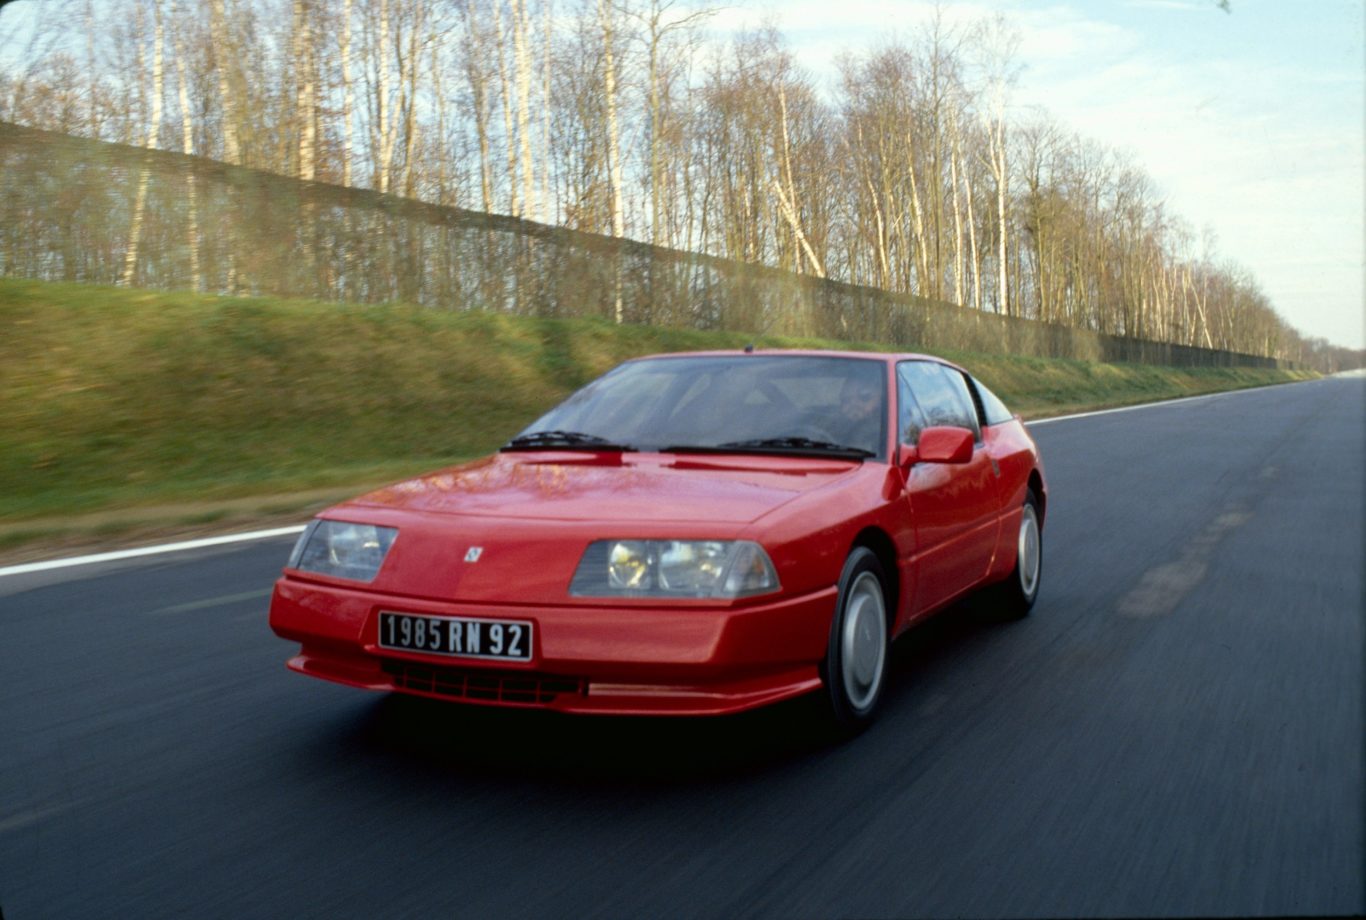 The Alpine GTA was a facelifted and modernised version of the old Alpine A310